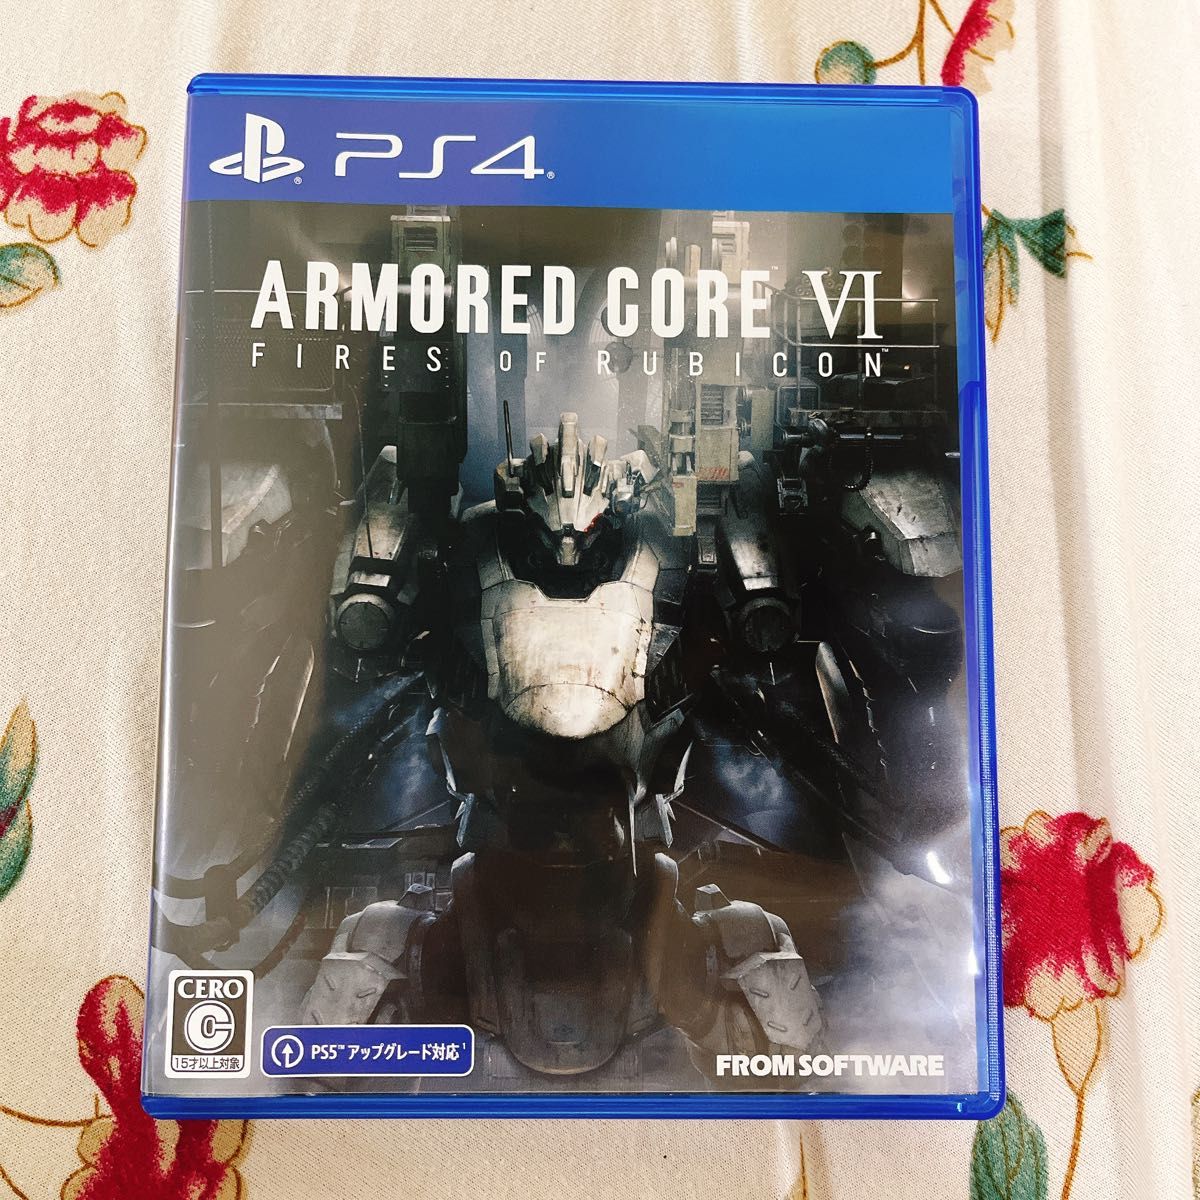 PS4 ARMORED CORE Ⅵ FIRES OF RUBICON アーマードコア 6 PS5にアップグレード可能